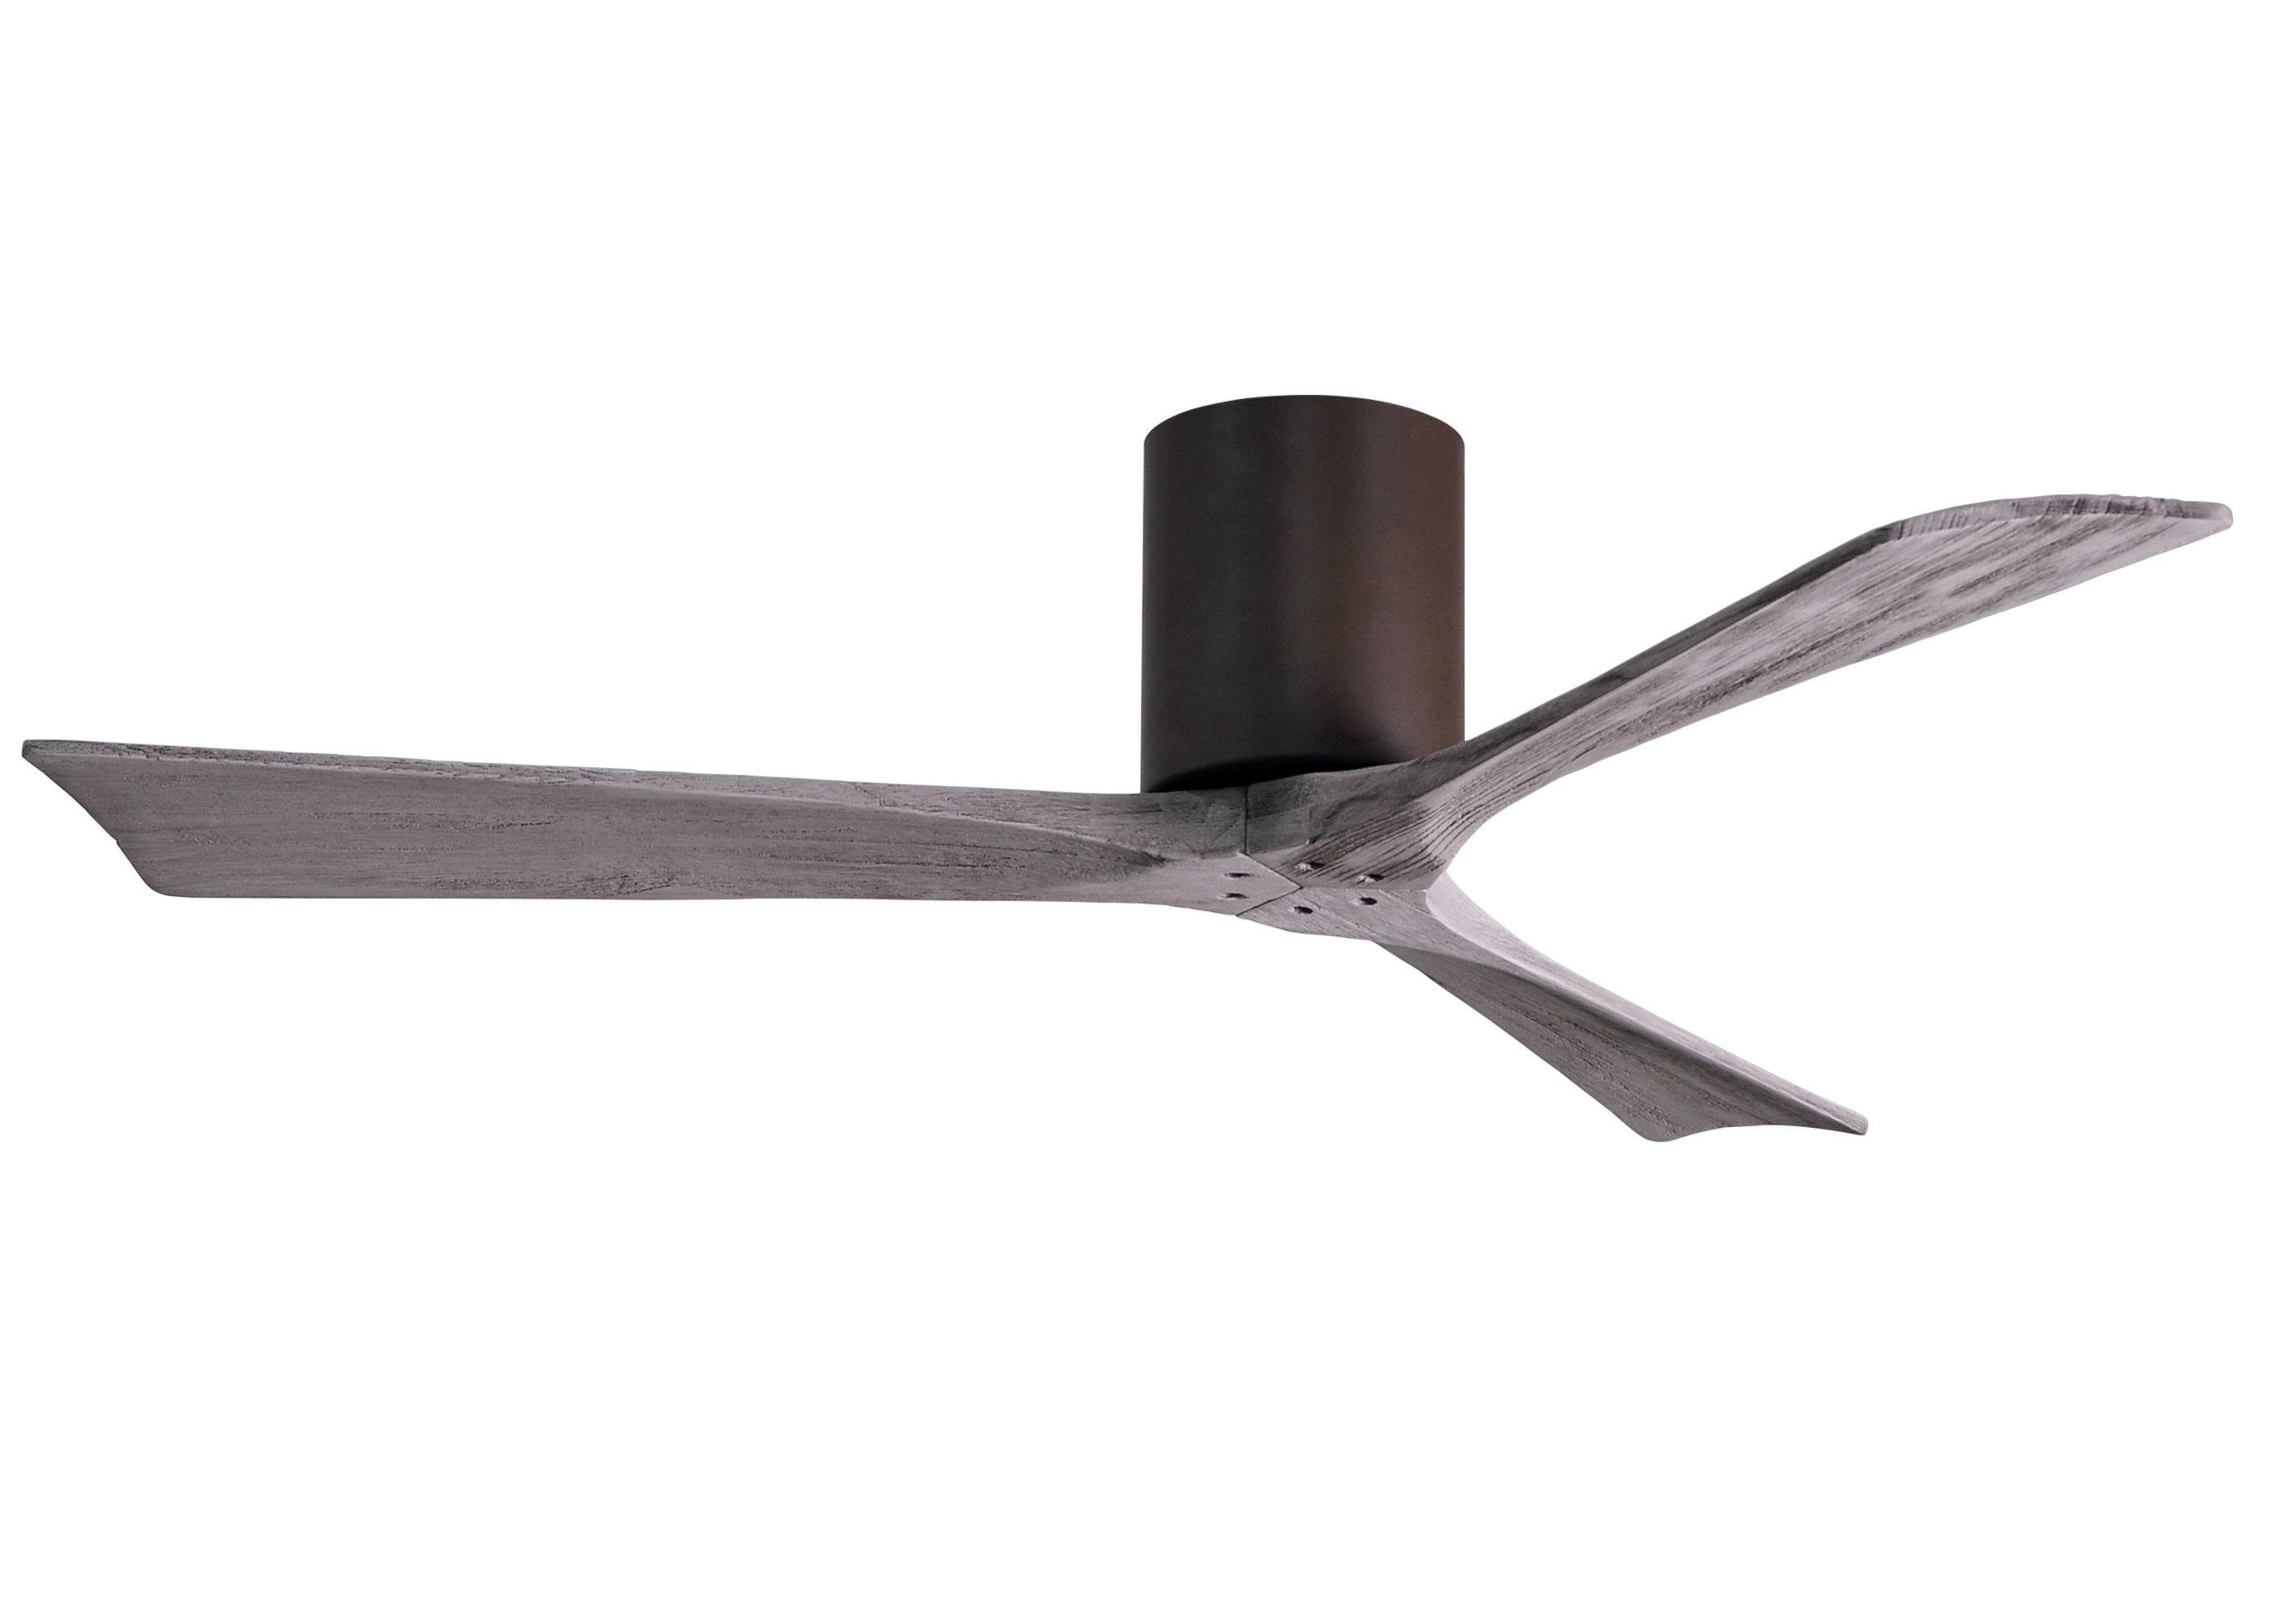 Wade Logan 52" Tyree 3 Blade Ceiling Fan With Remote Regarding Most Up To Date Tyree 3 Blade Ceiling Fans (View 3 of 20)